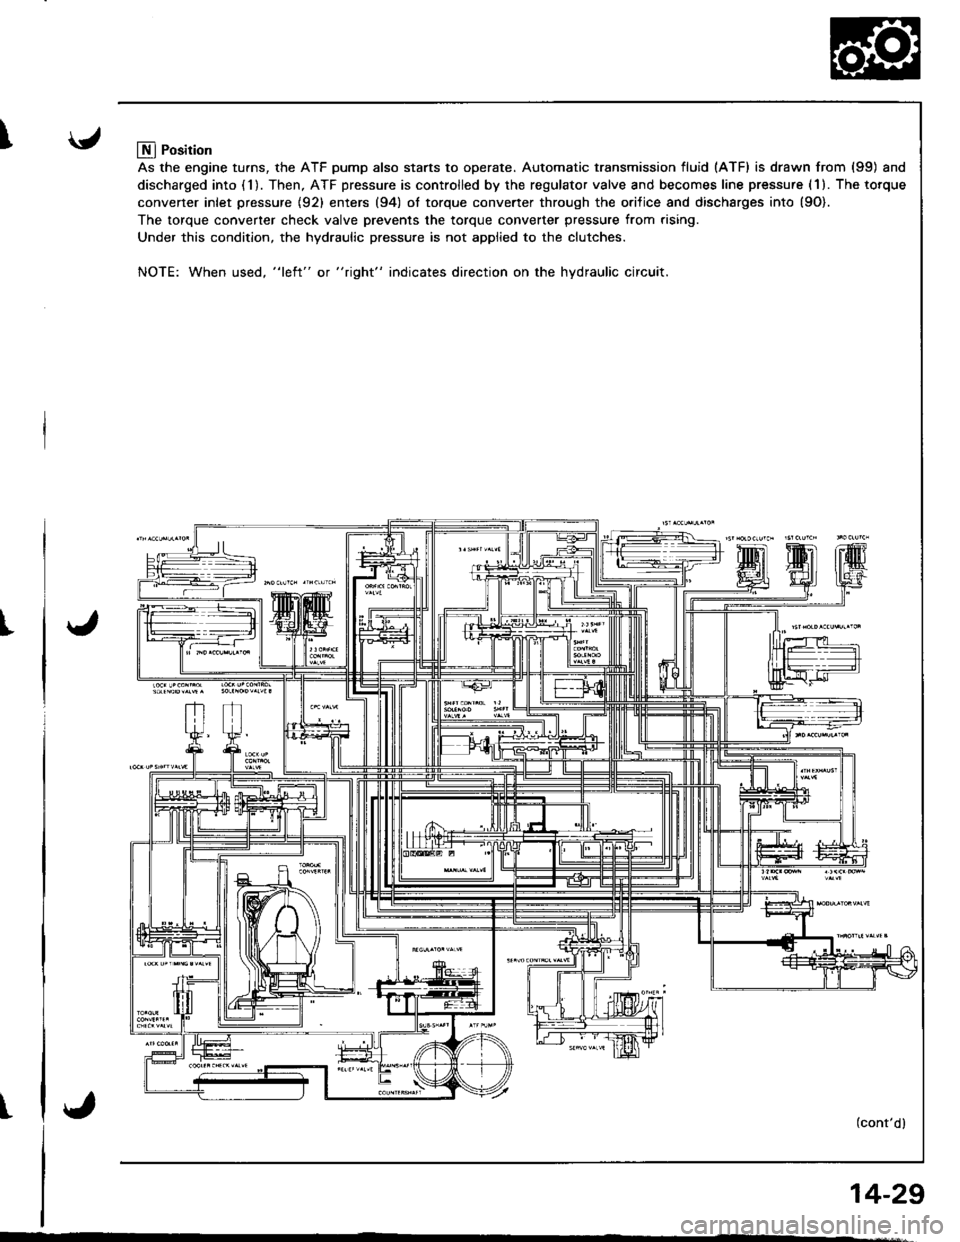 ACURA INTEGRA 1998  Service Repair Manual I
I
I
Llfl Position
As the engine turns, the ATF pump also starts to operate. Automatic transmission fluid (ATF) is drawn from (99) and
discharged into (1). Then, ATF pressure is controlled by the reg